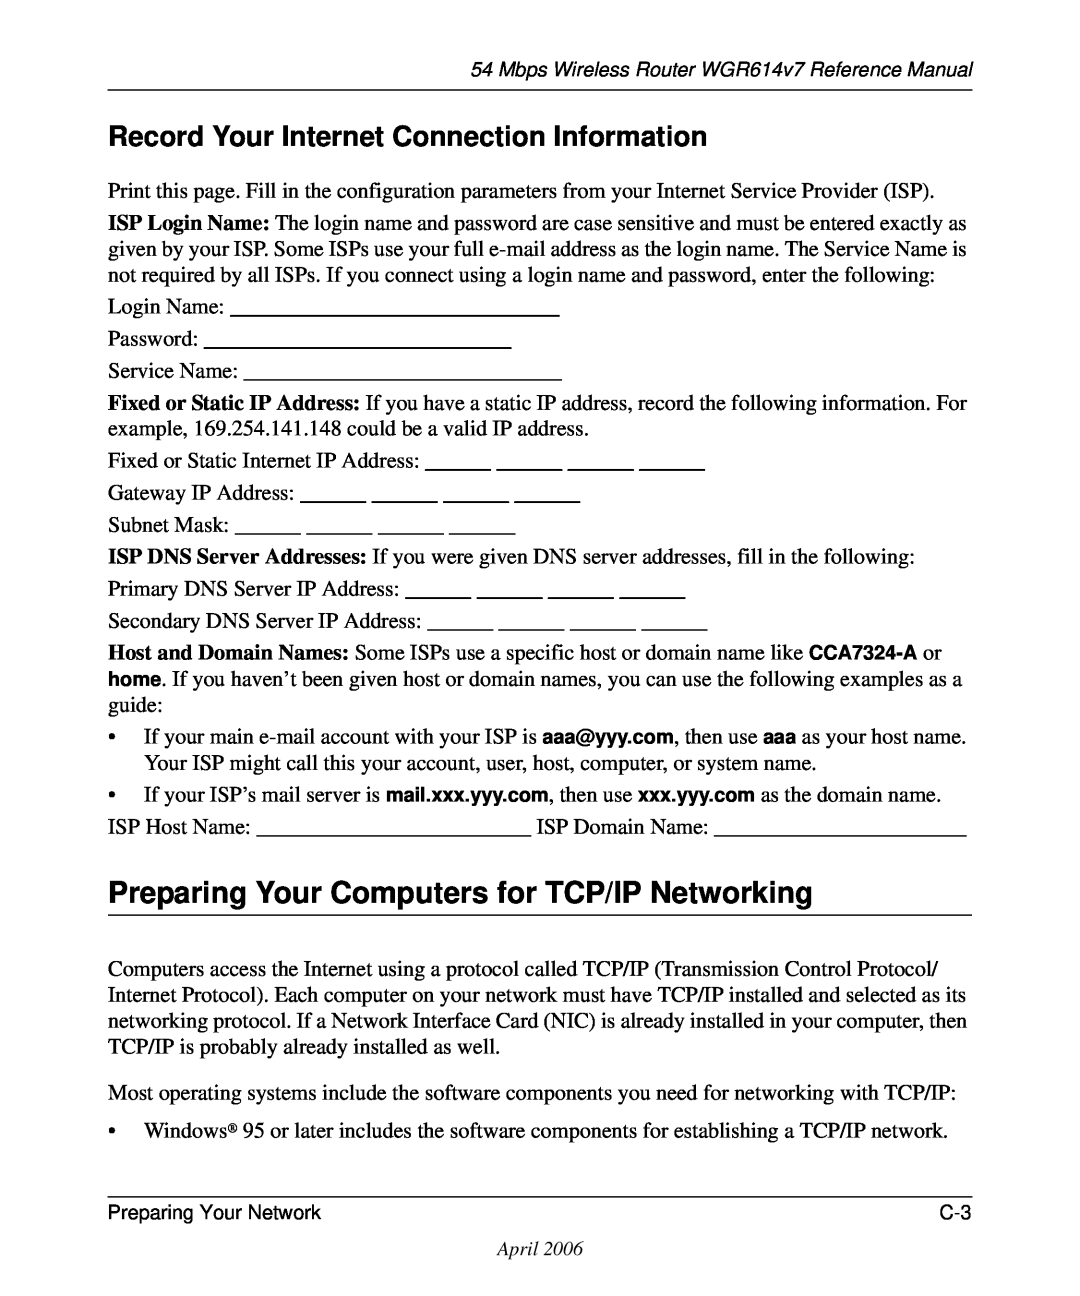 NETGEAR WGR614v7 manual Preparing Your Computers for TCP/IP Networking, Record Your Internet Connection Information 